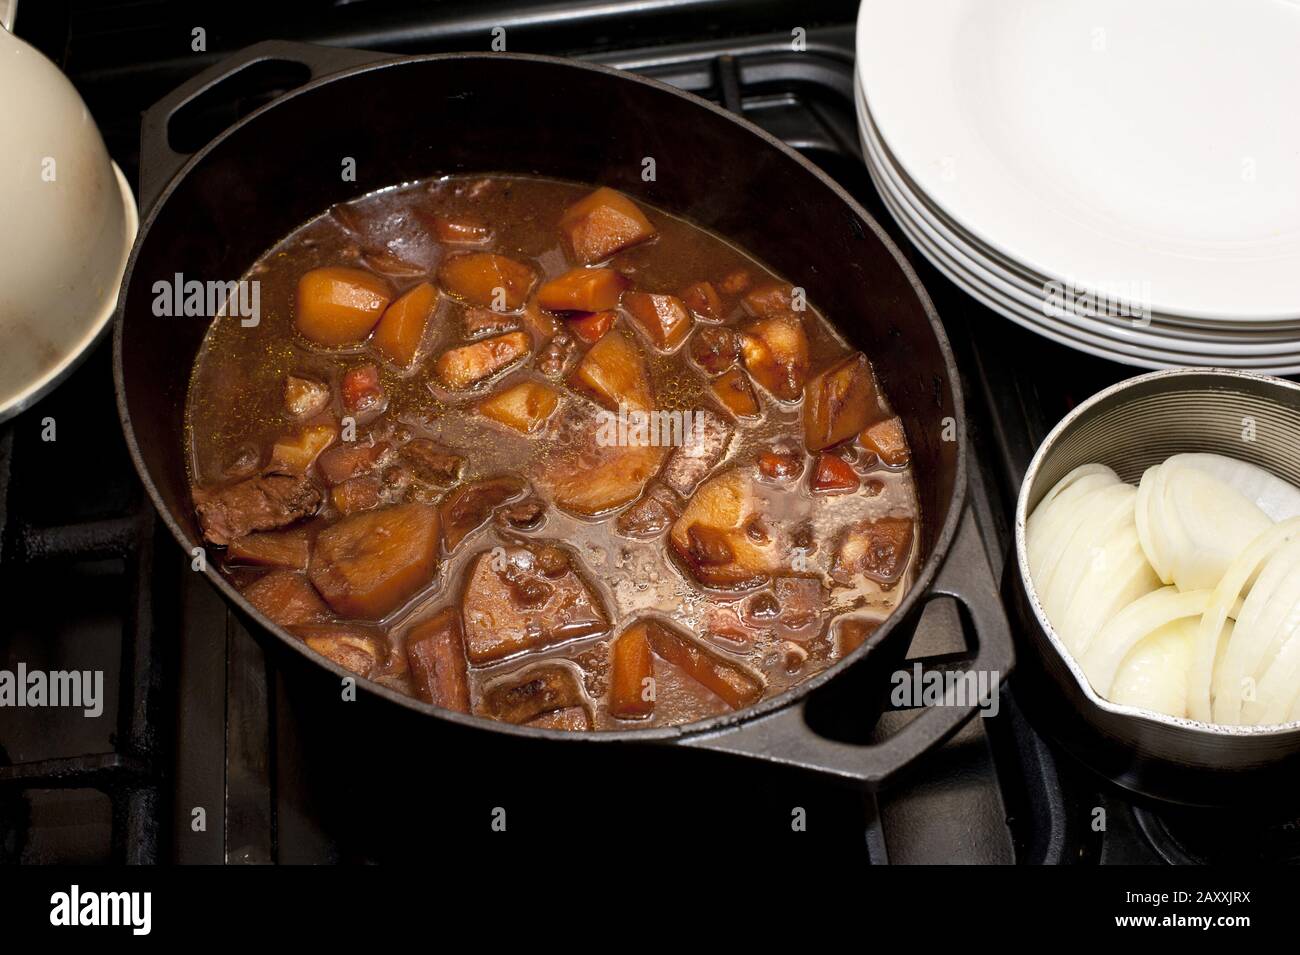 https://c8.alamy.com/comp/2AXXJRX/delicious-hot-soup-with-potatoes-meat-different-vegetables-in-saucepan-on-stove-from-above-2AXXJRX.jpg